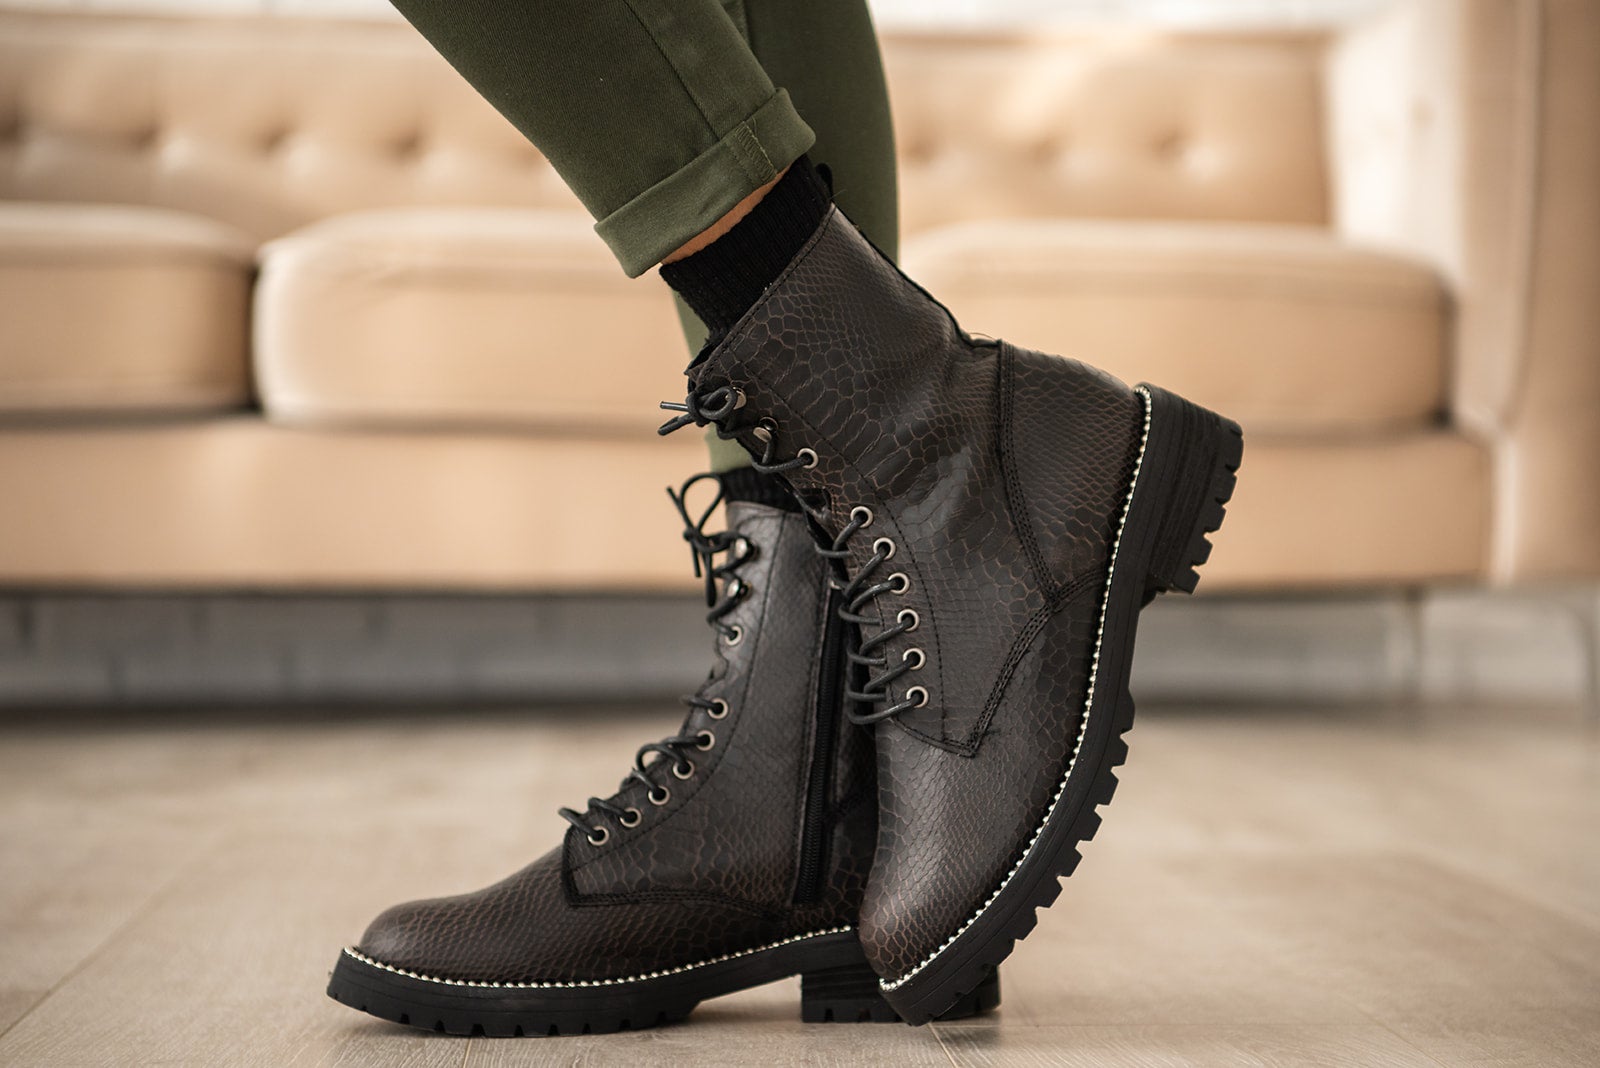 Conquest Snake Print Combat Boot